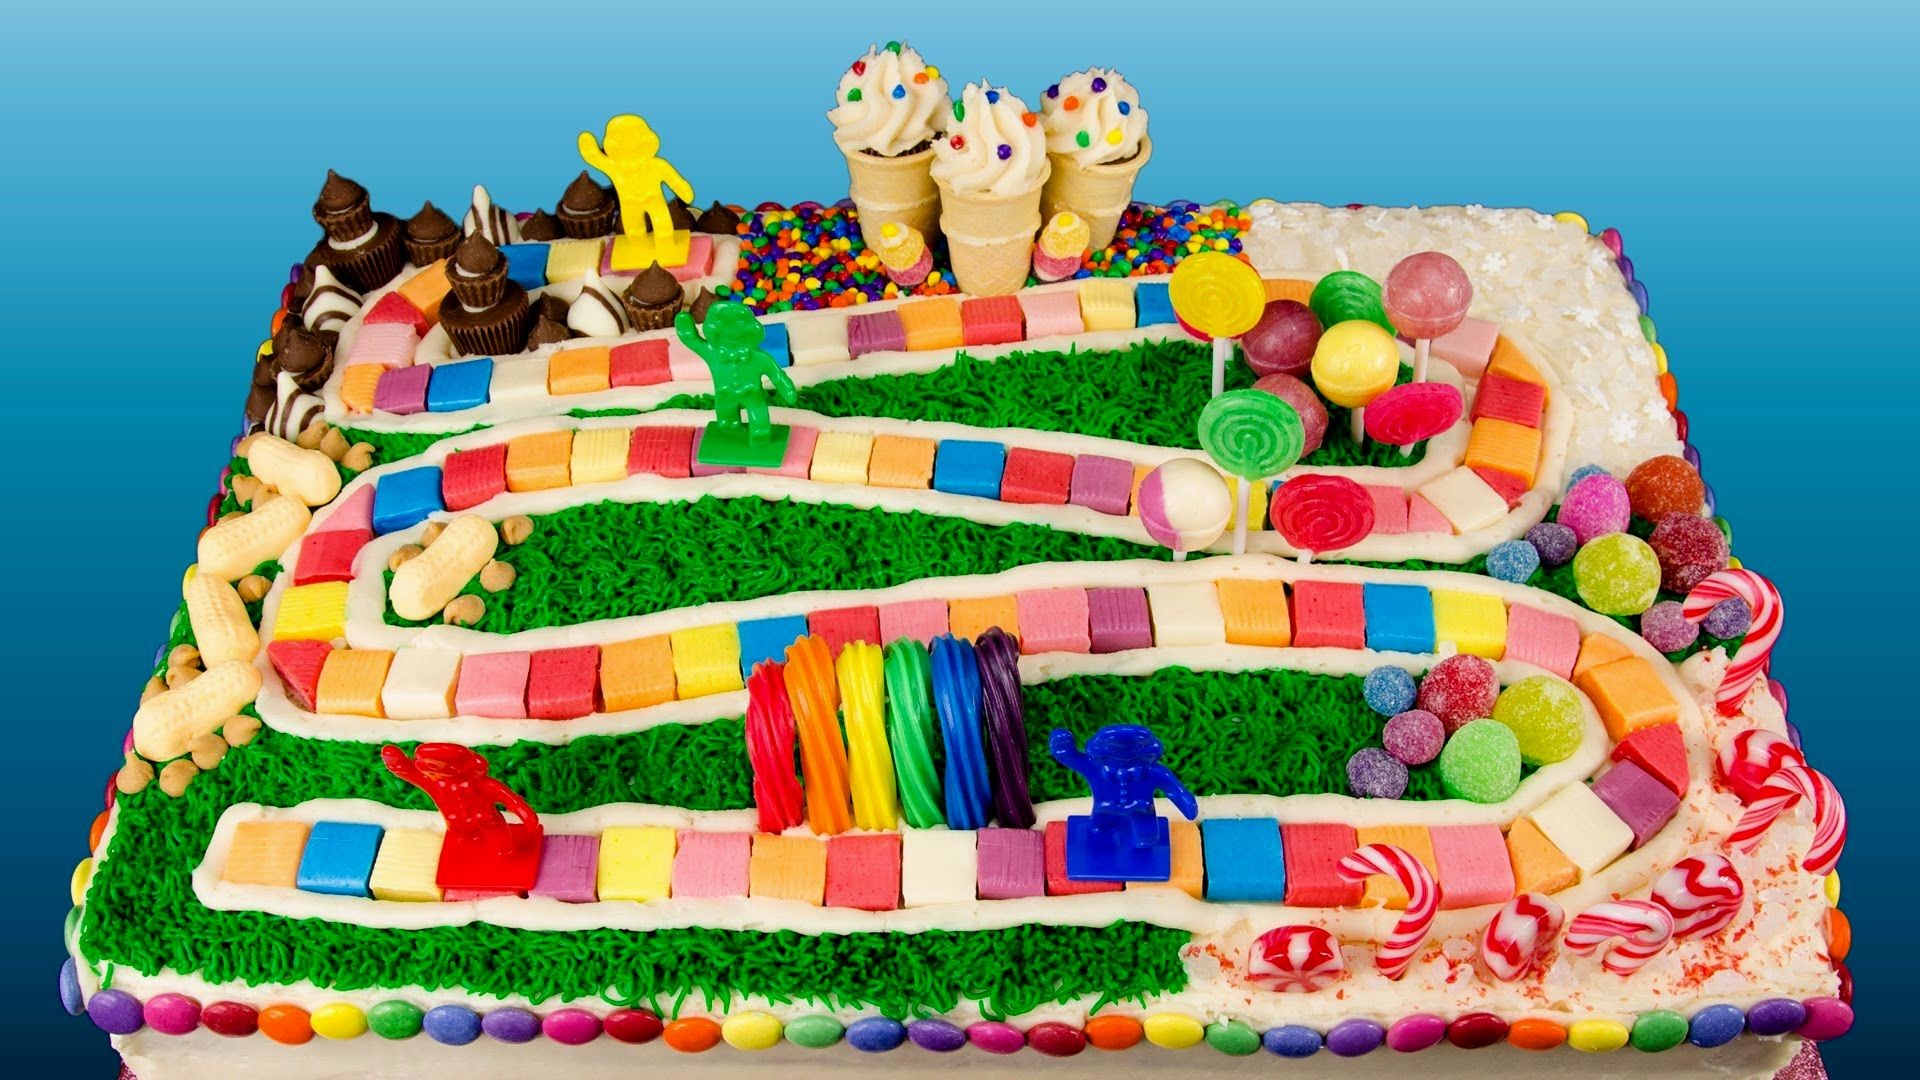 Free Candyland Backgrounds  Wallpaper Cave  nohatcc